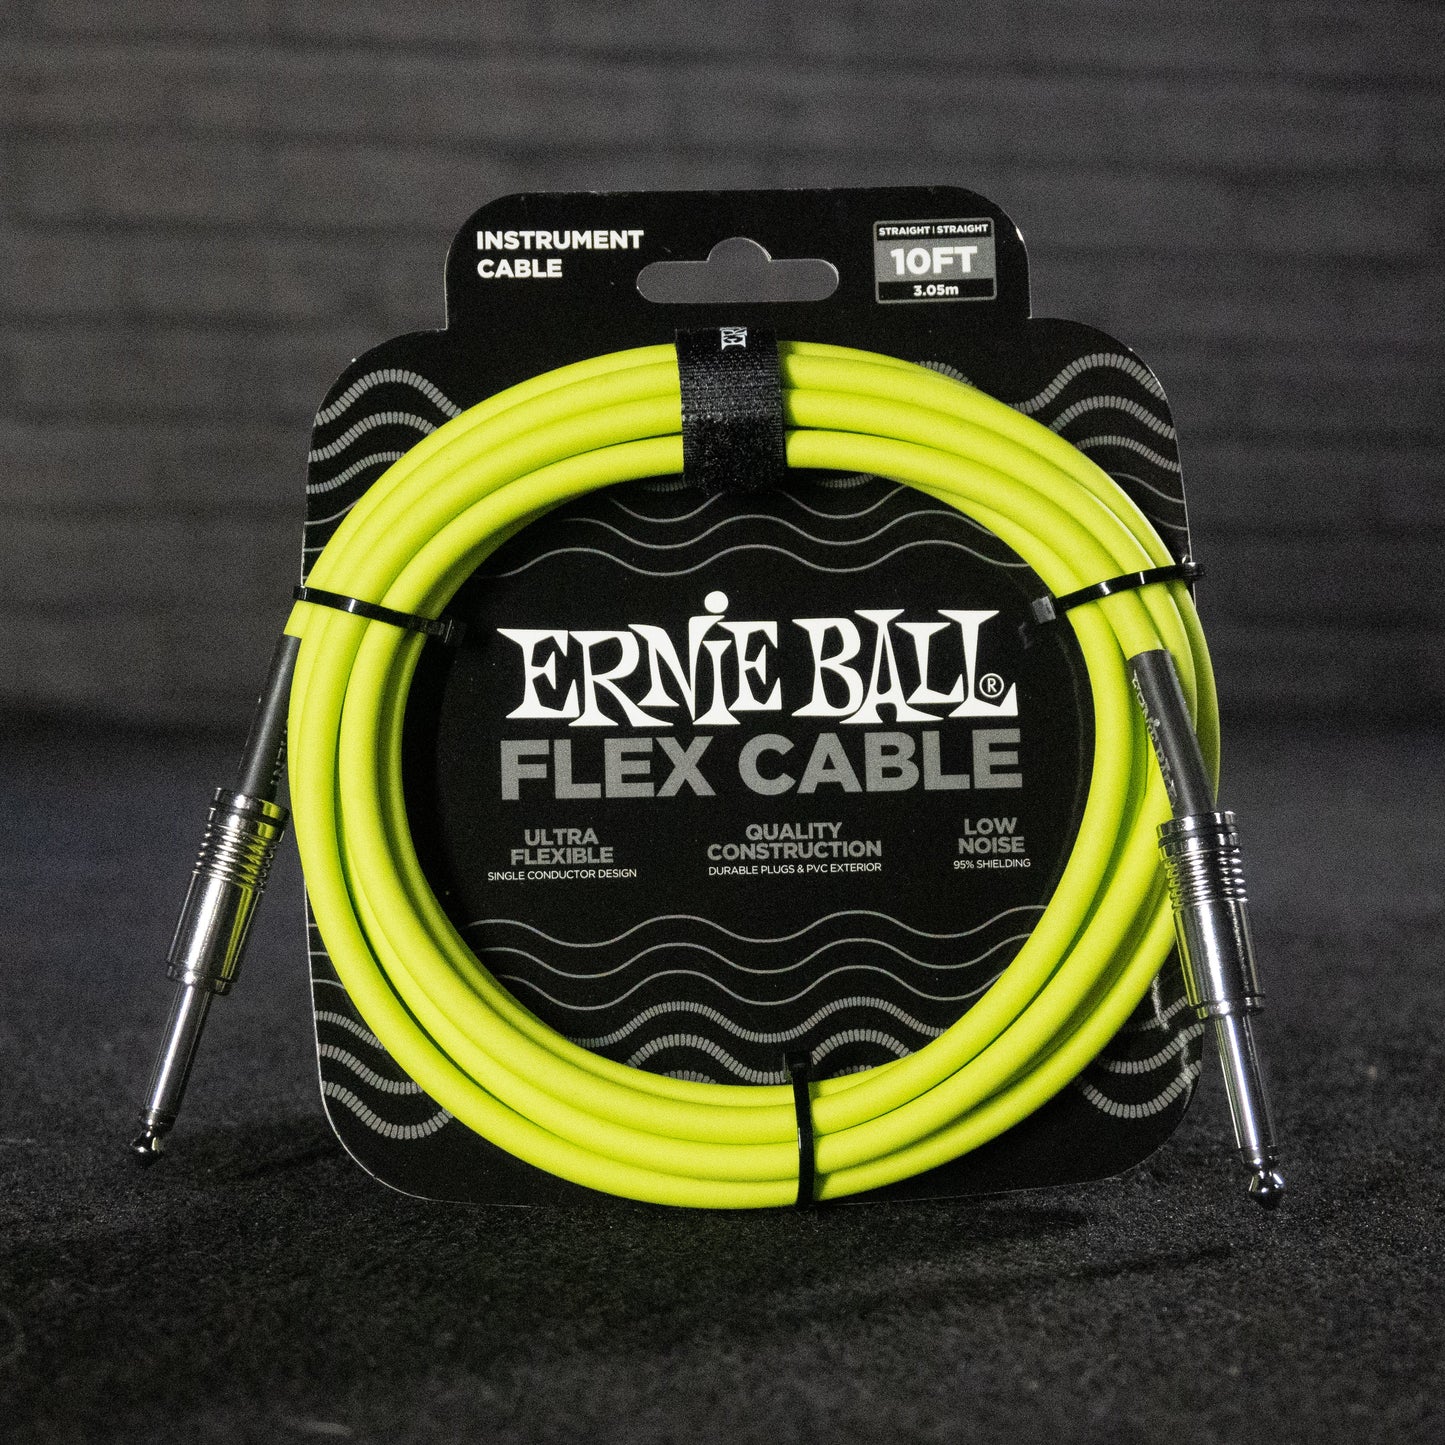 Ernie Ball Flex Instrument Cable Straight/Straight 10ft (Green)